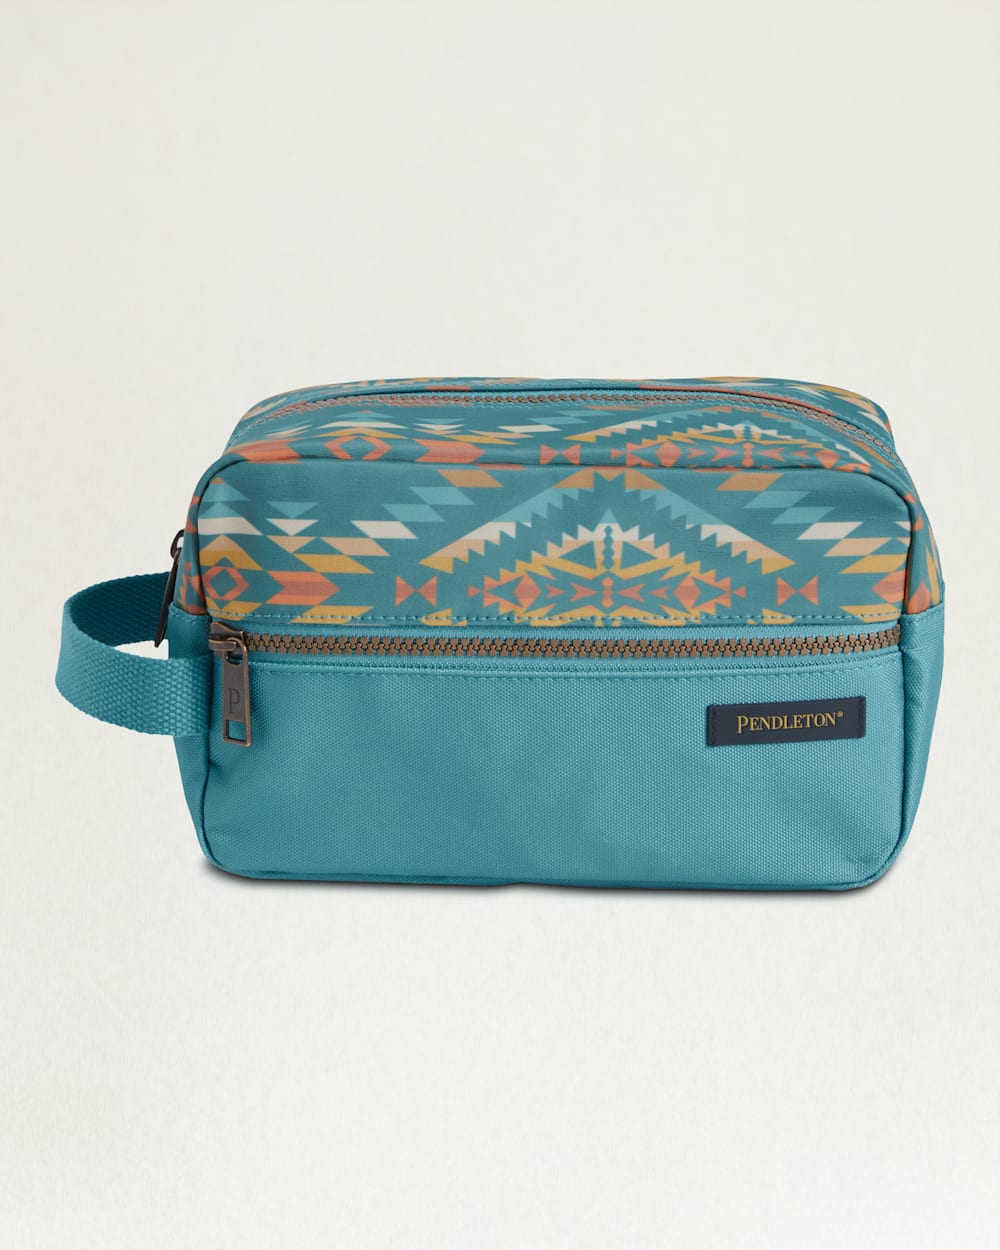 SUMMERLAND BRIGHT CANOPY CANVAS CARRYALL POUCH IN TURQUOISE image number 1